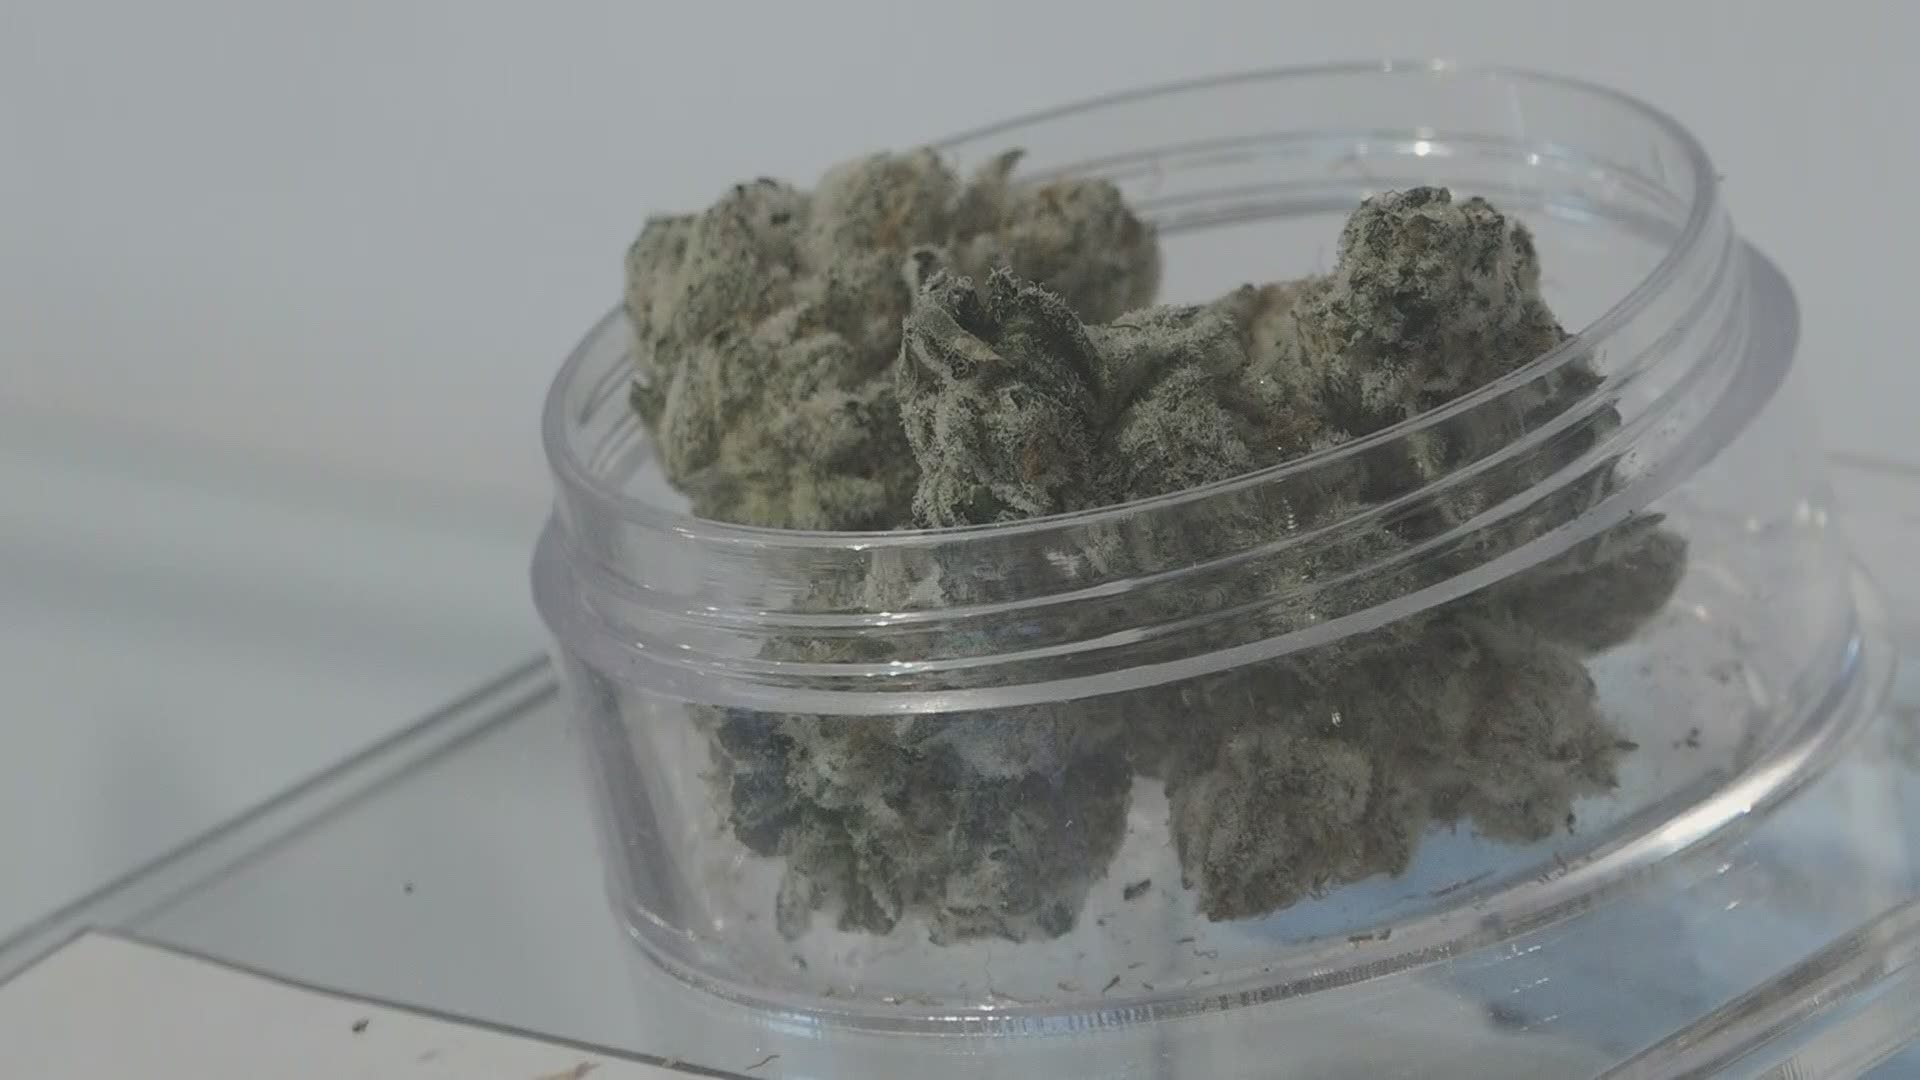 It's been one week since Maine began selling recreational marijuana out of eight licensed shops around the state.